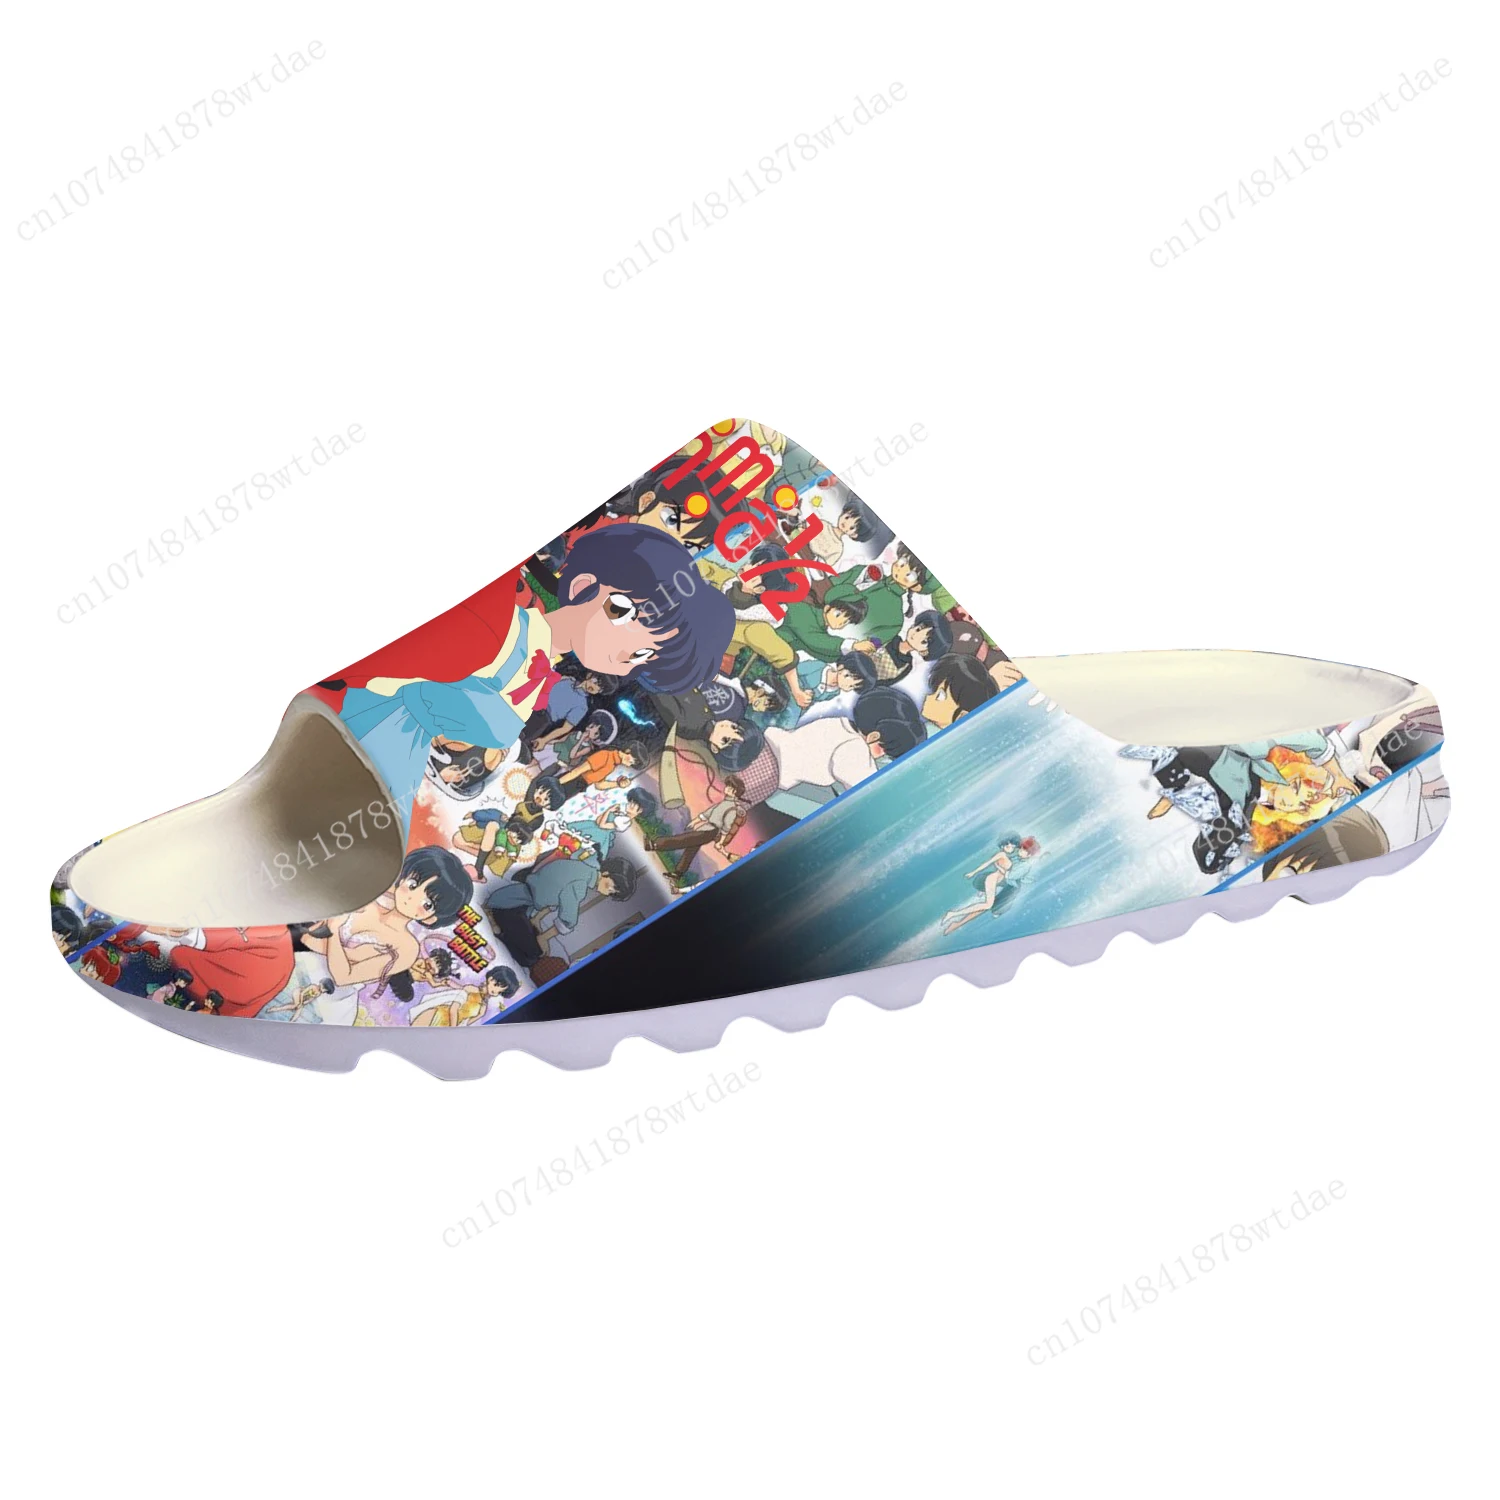 

Ranma 1/2 Soft Sole Sllipers Mens Womens Teenager Home Clogs Fashion Anime Cartoon Step In Water Shoes On Shit Customize Sandals